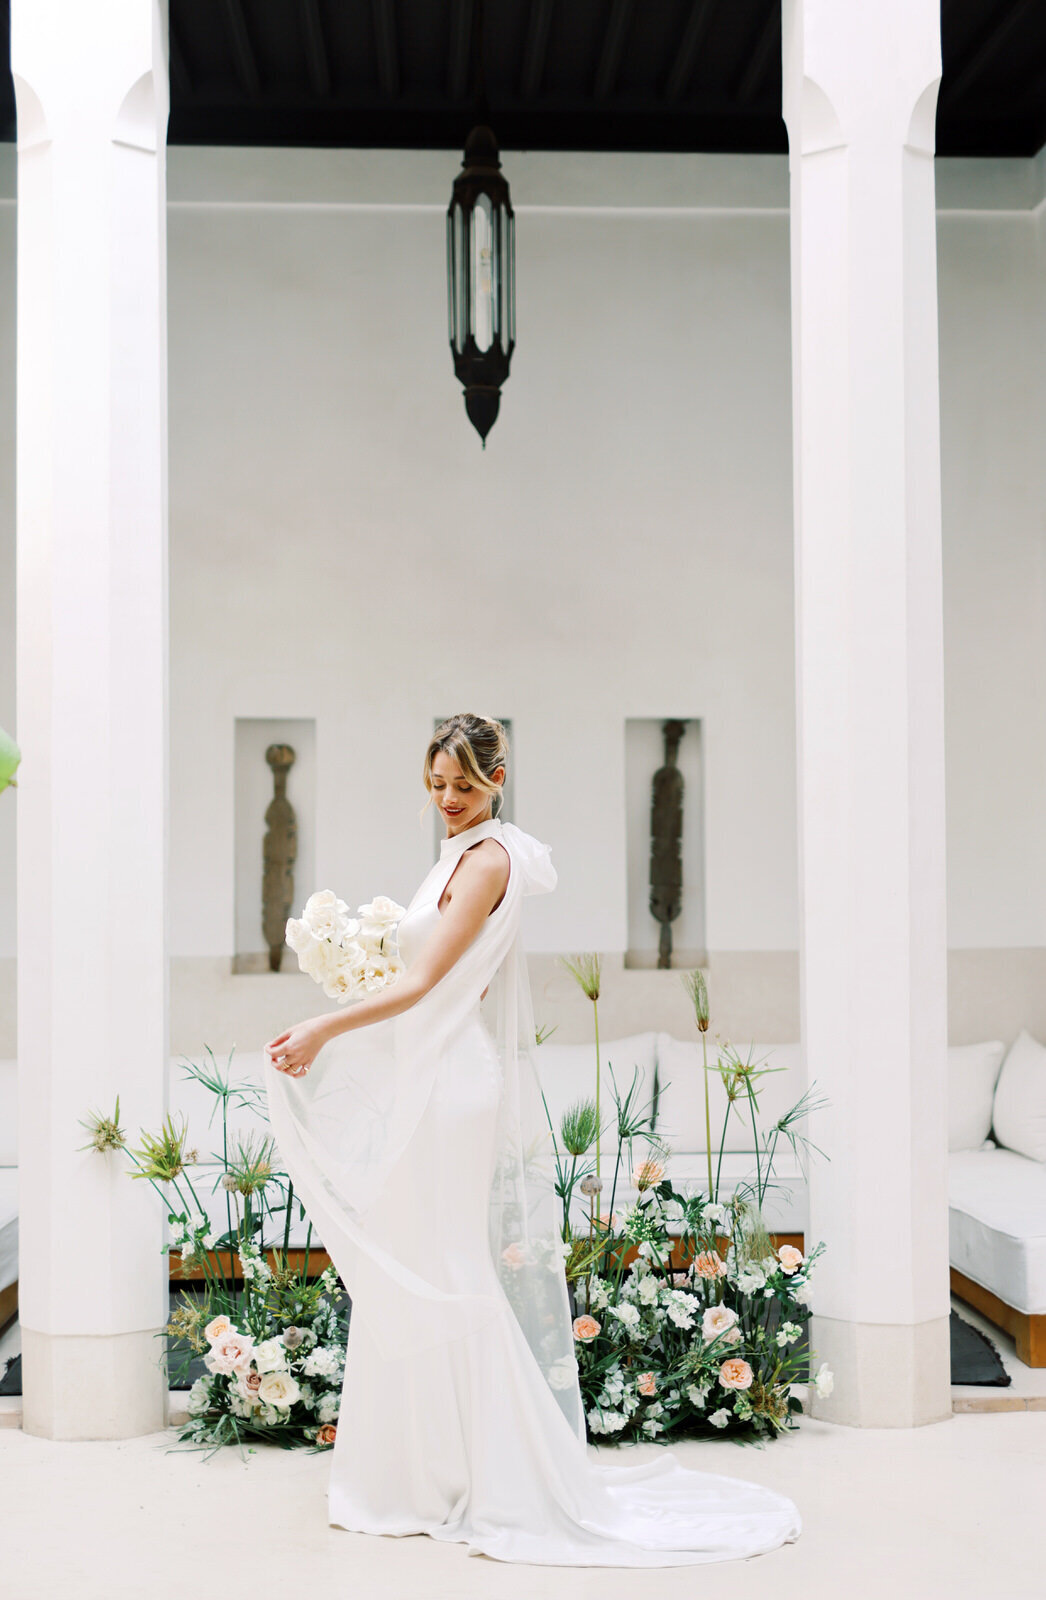 Stylish Elopement Photography in Marrakech 1